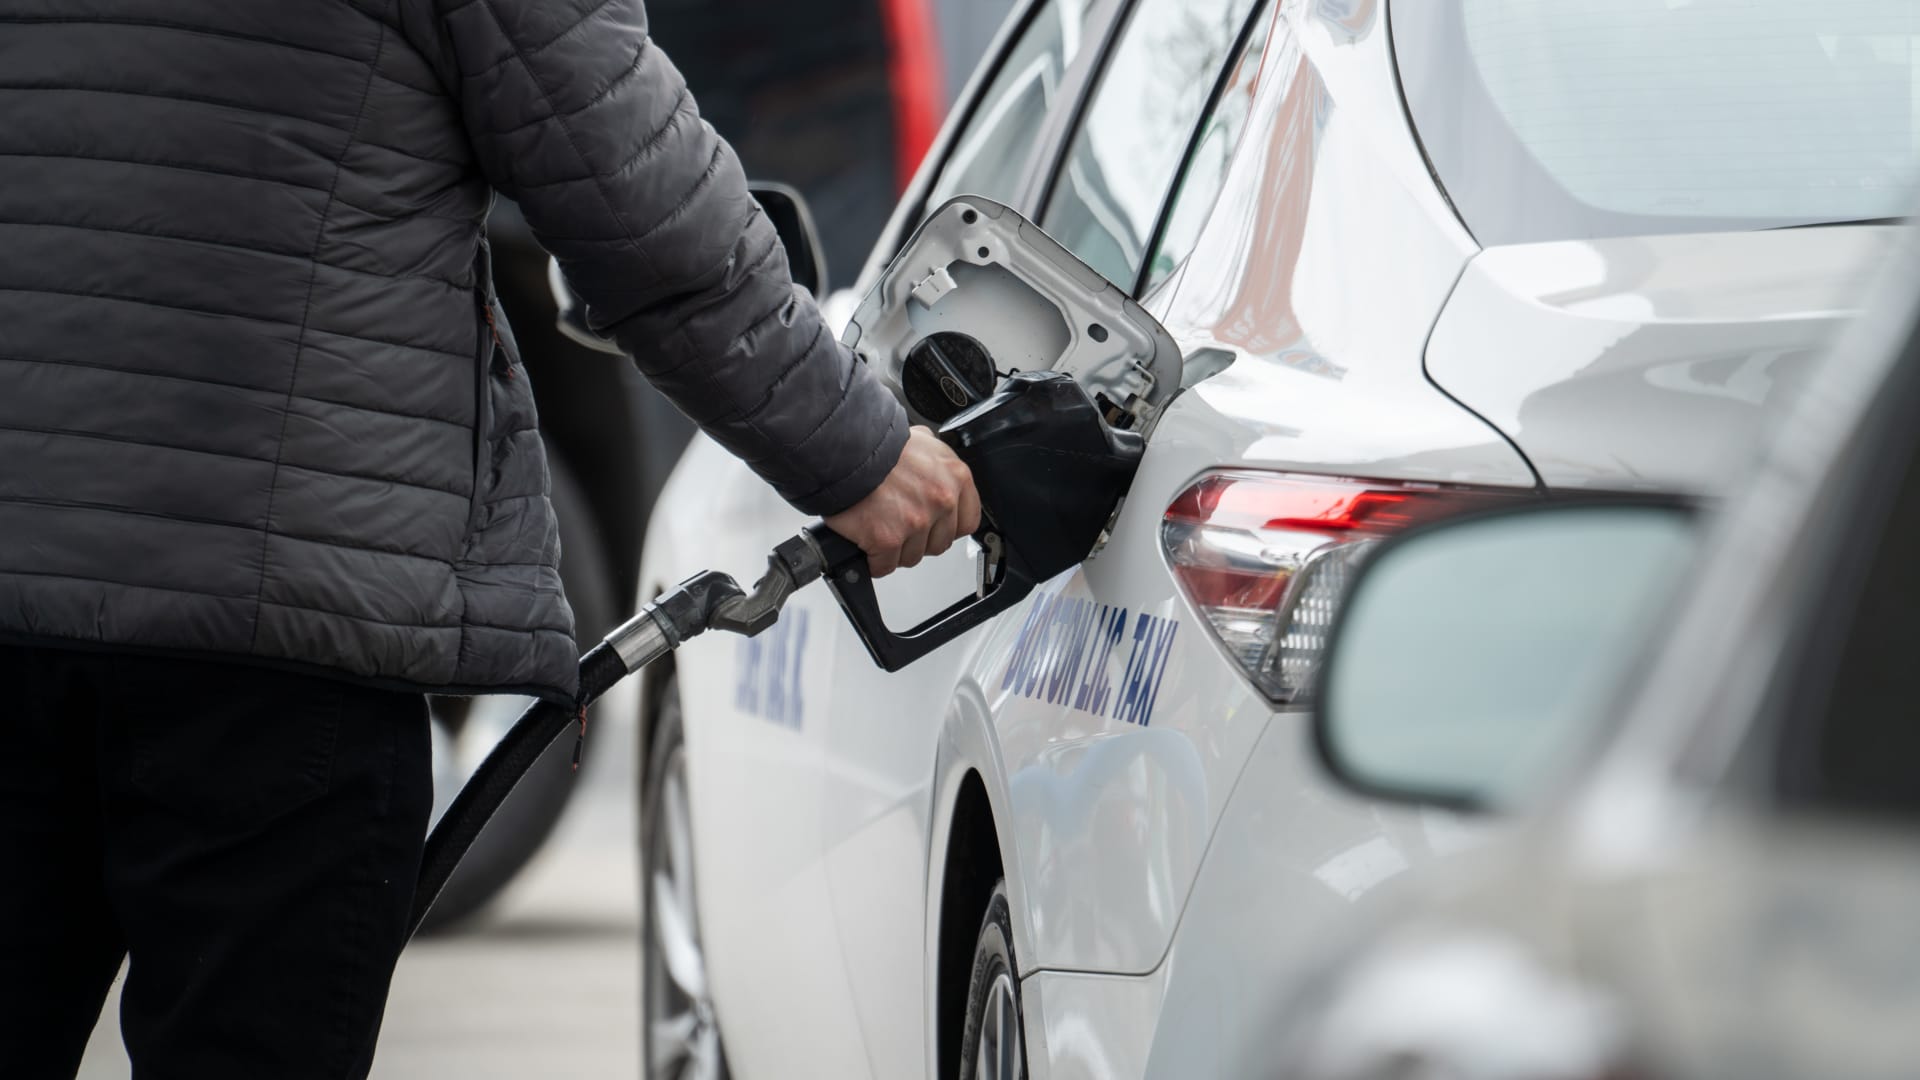 A taxi driver refuels a vehicle at a Gulf gas station in Boston on March 1, 2022.